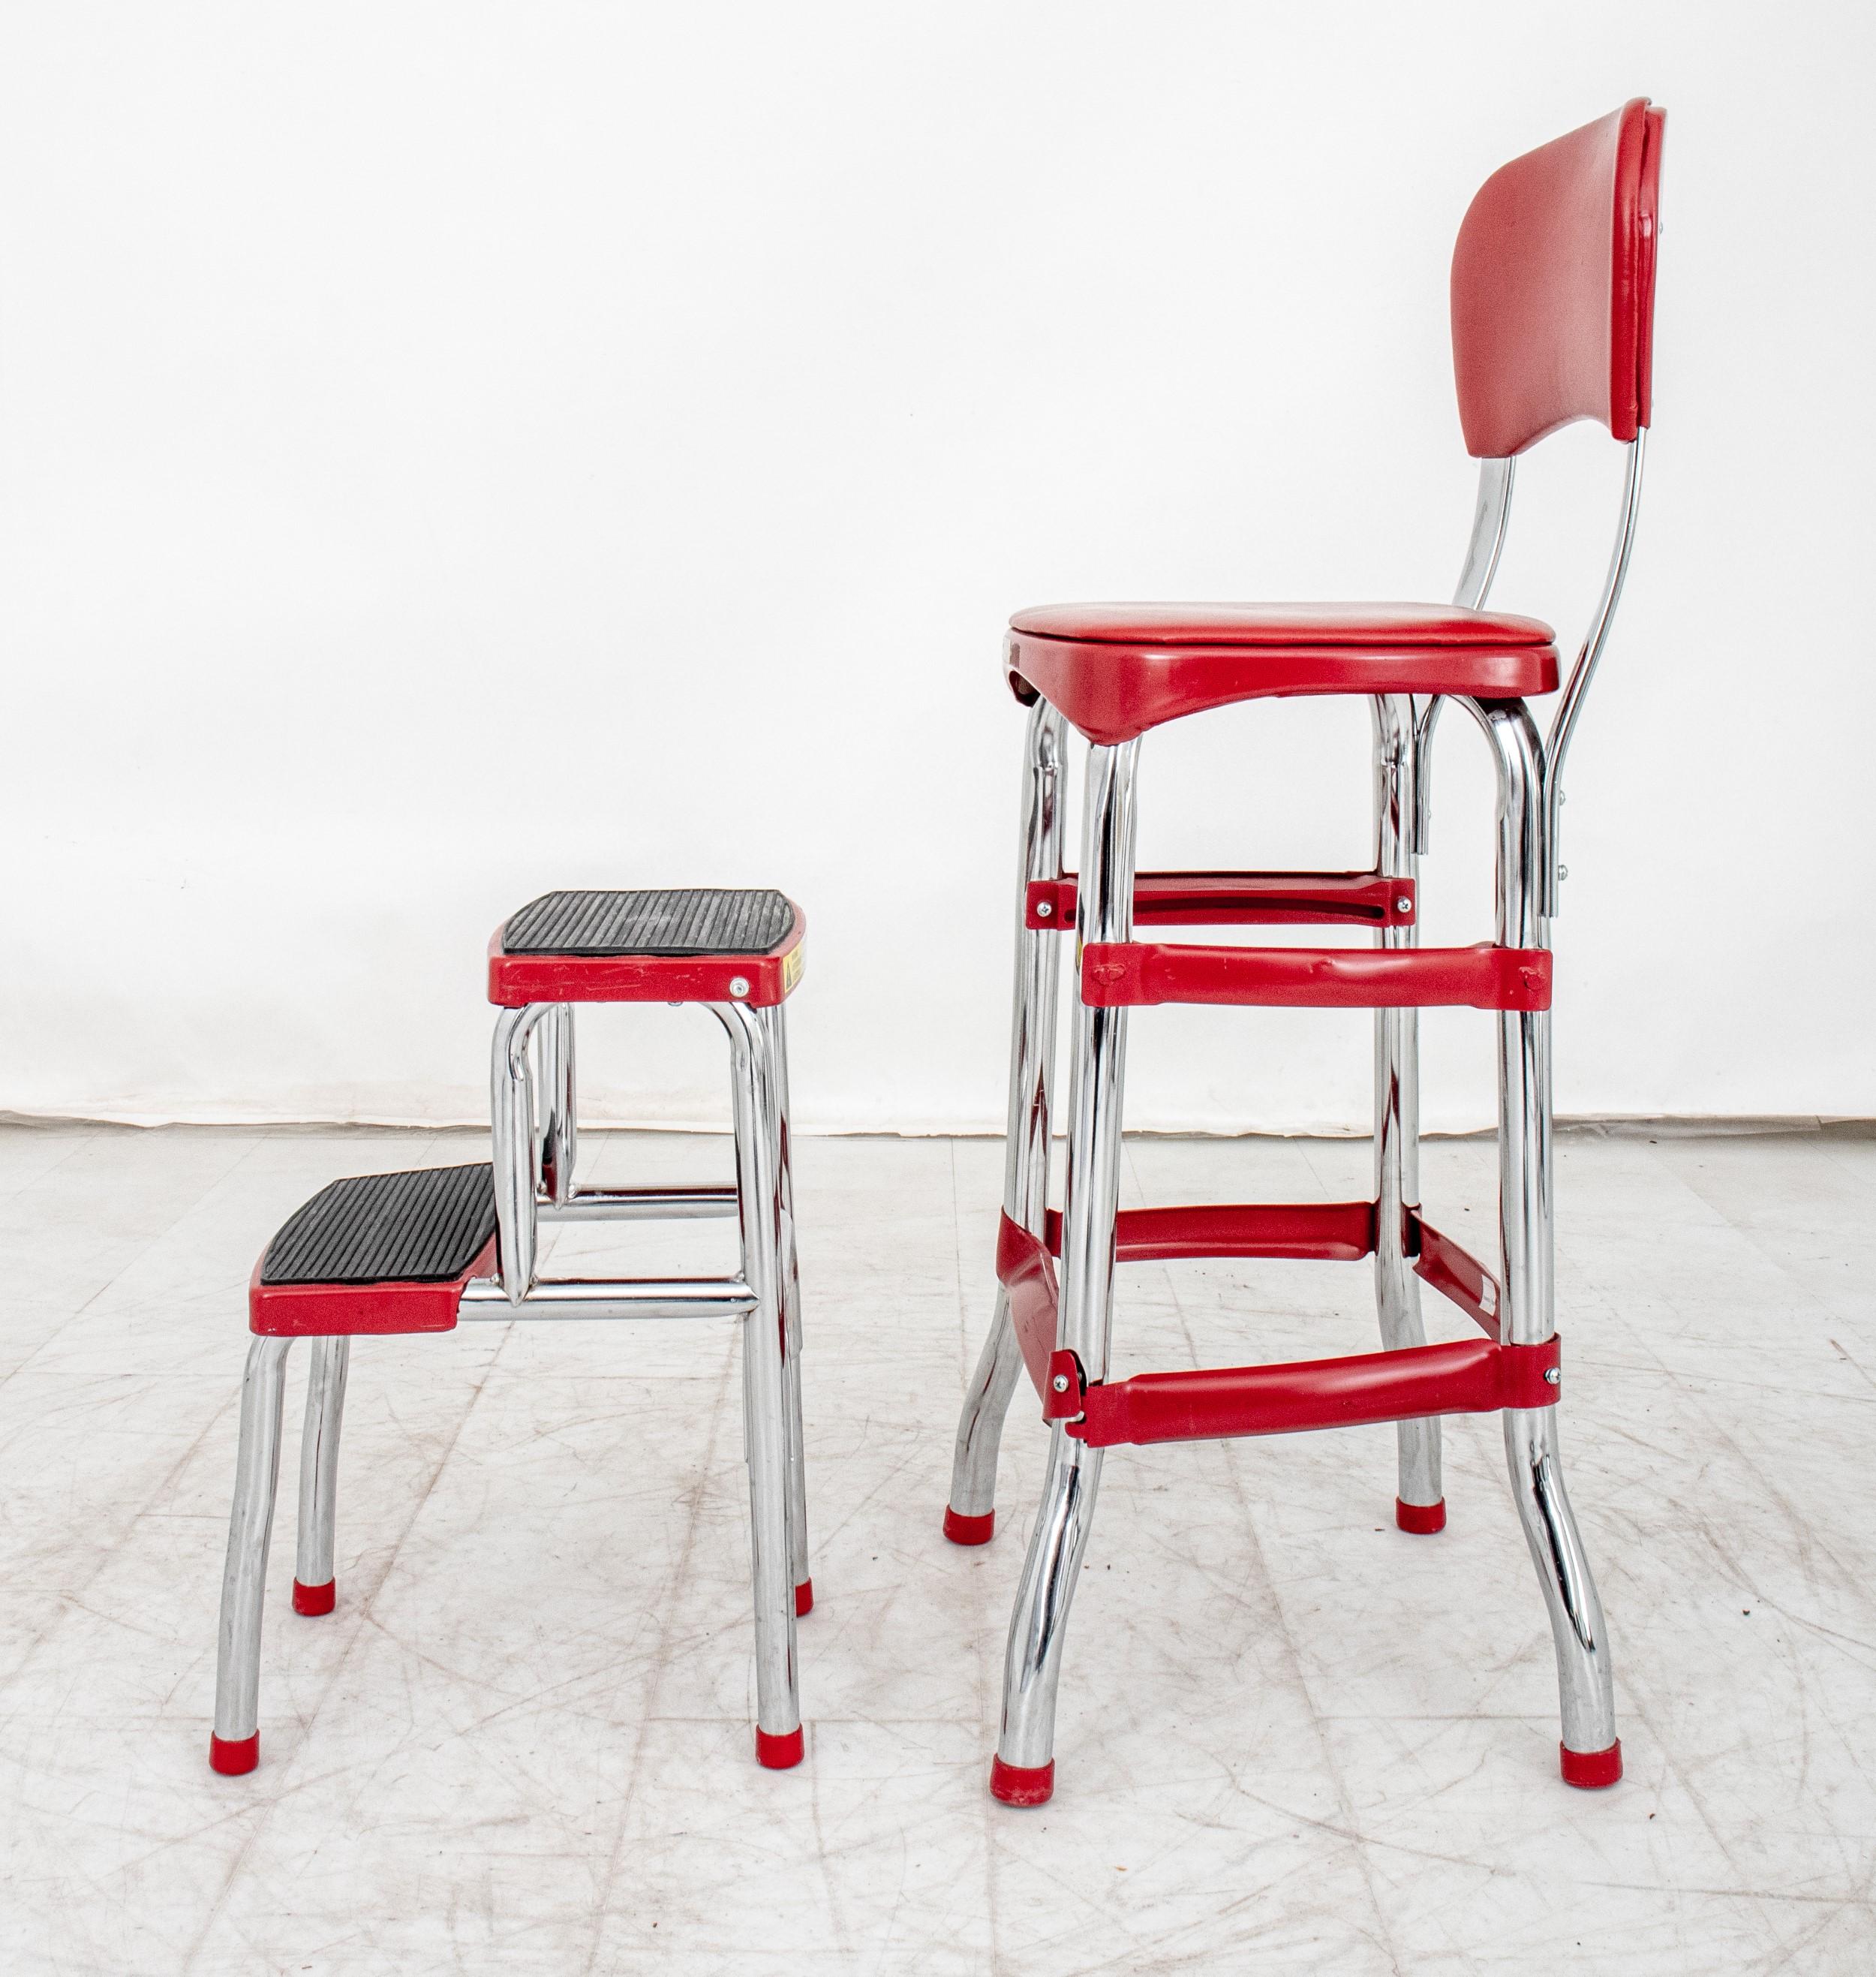 Cosco Retro Red Kitchen Step Chair. Here's the information:

Brand: Cosco
Style: Retro
Color: Red
Construction Material: Chromed metal legs
Features:
Kitchen Step Chair design
Marked to reverse, indicating a manufacturer's mark or